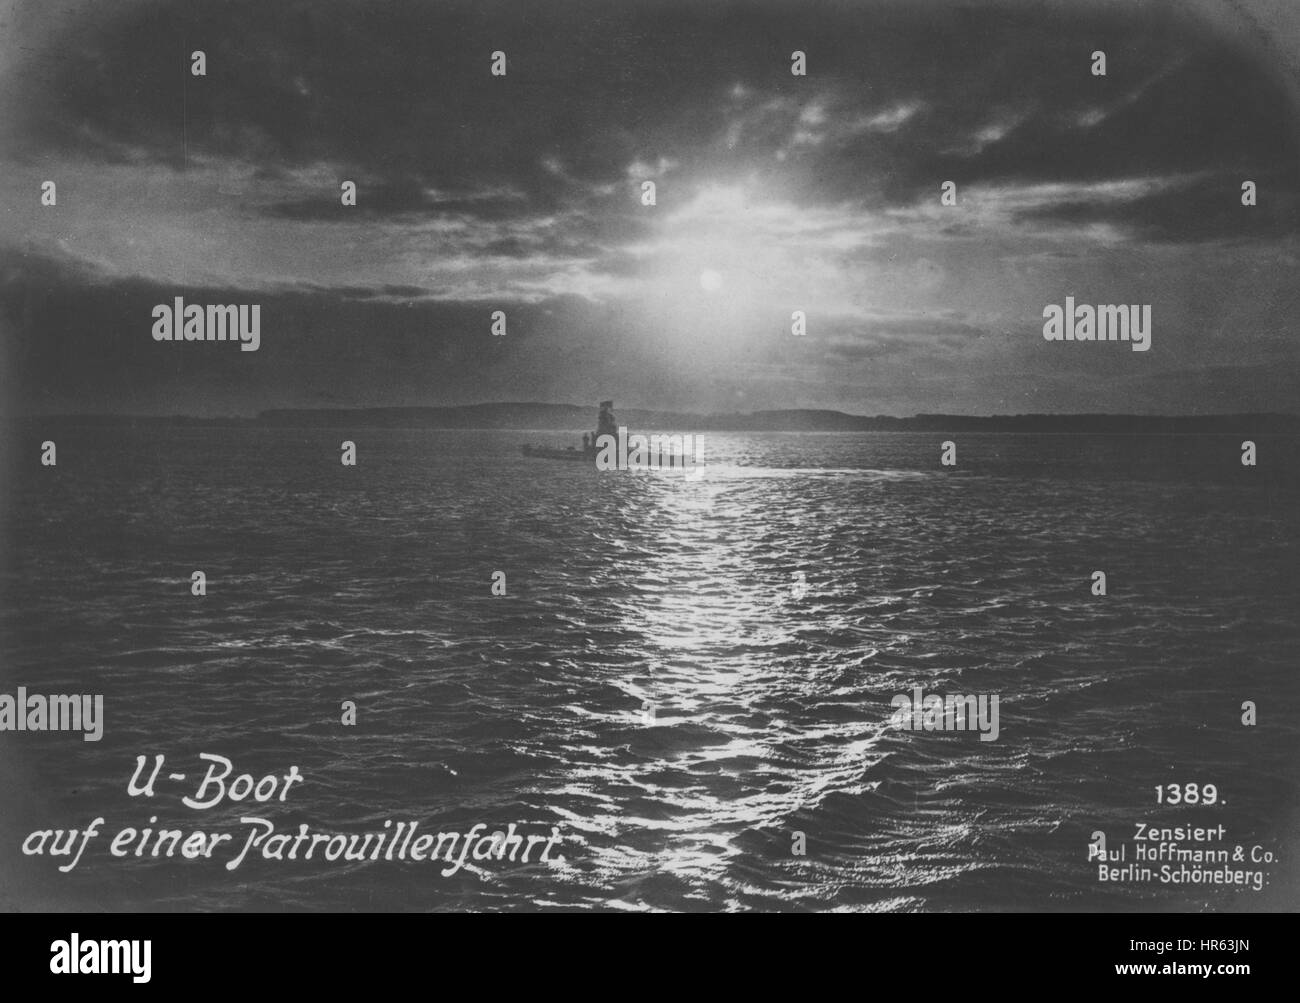 German World War I photographic postcard depicting U-boat on patrol, 1915. From the New York Public Library. Stock Photo